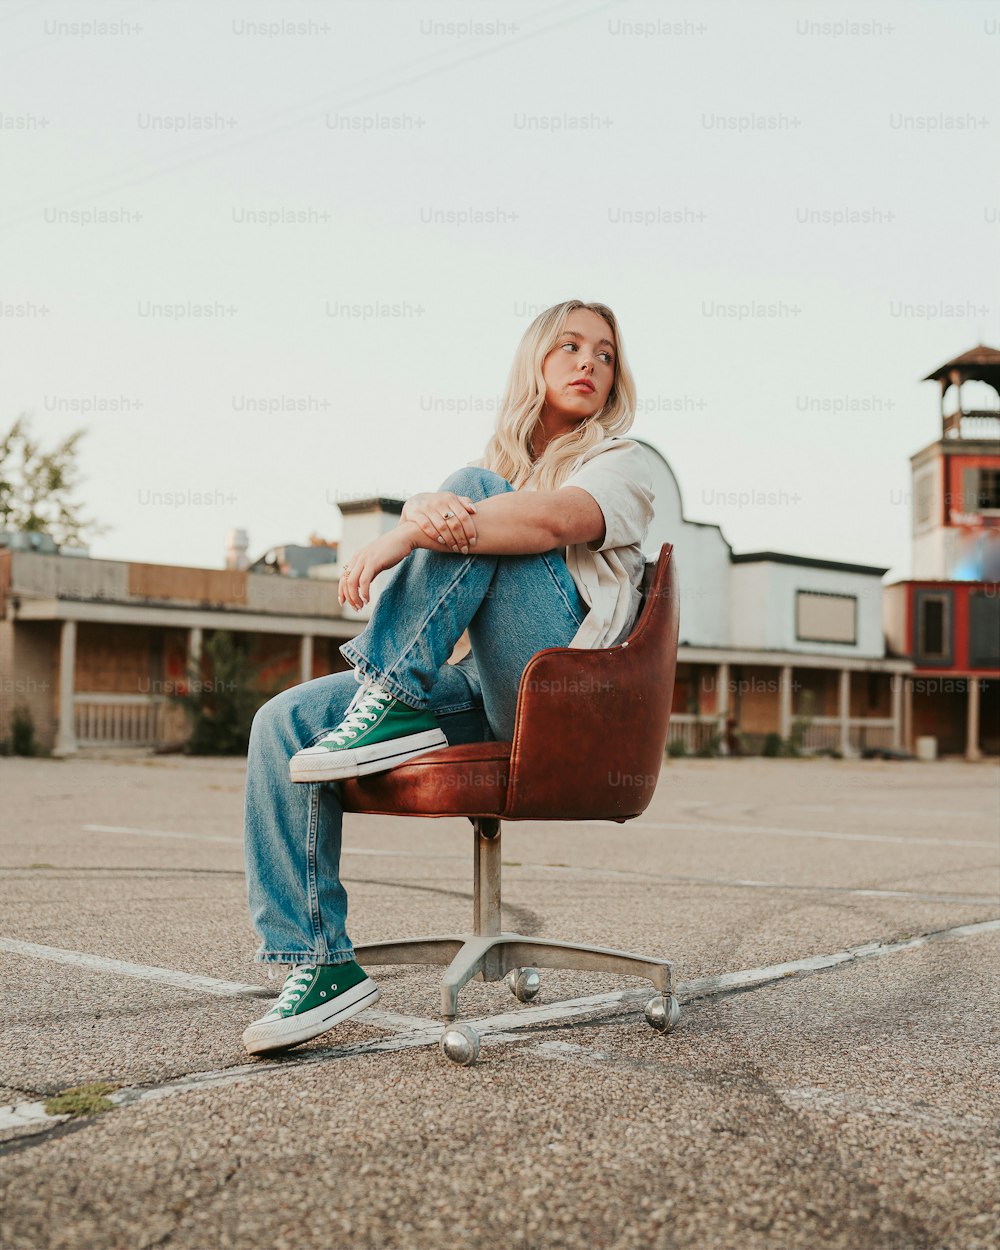 a woman sitting on a chair in a parking lot